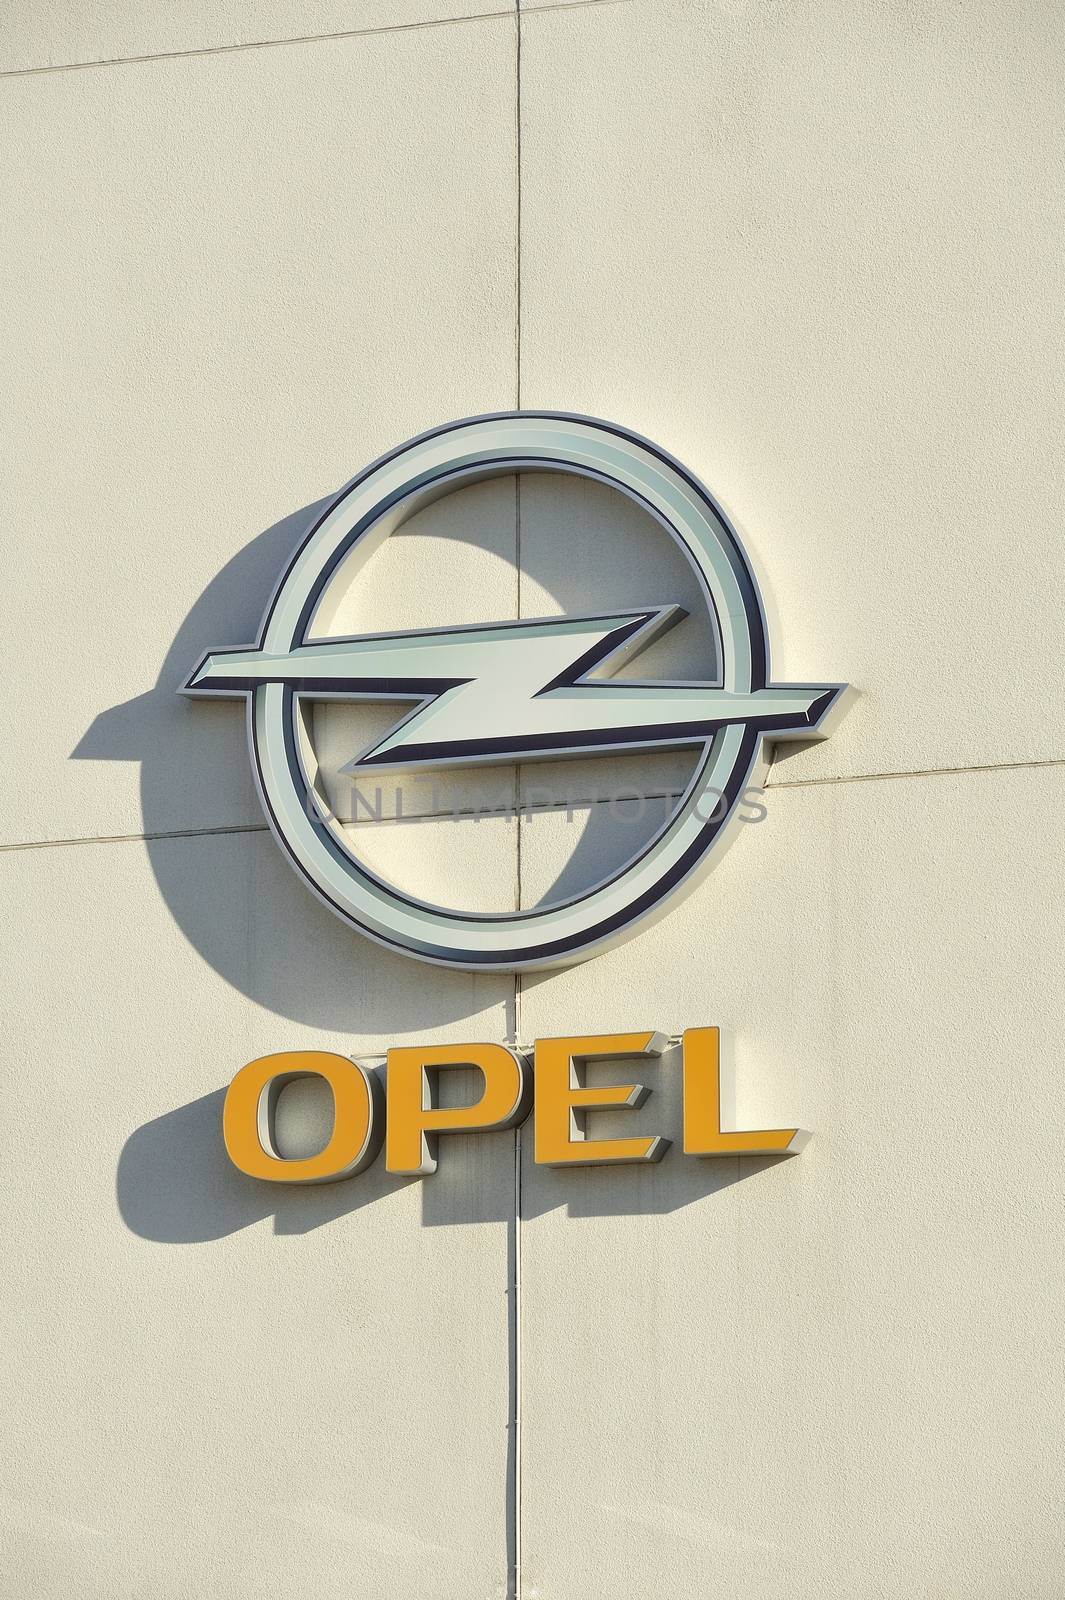 STOCKHOLM - MAY 1 2013: Opel logo sign on showroom premises photographed on may 1th 2013 in Stockholm, Sweden.